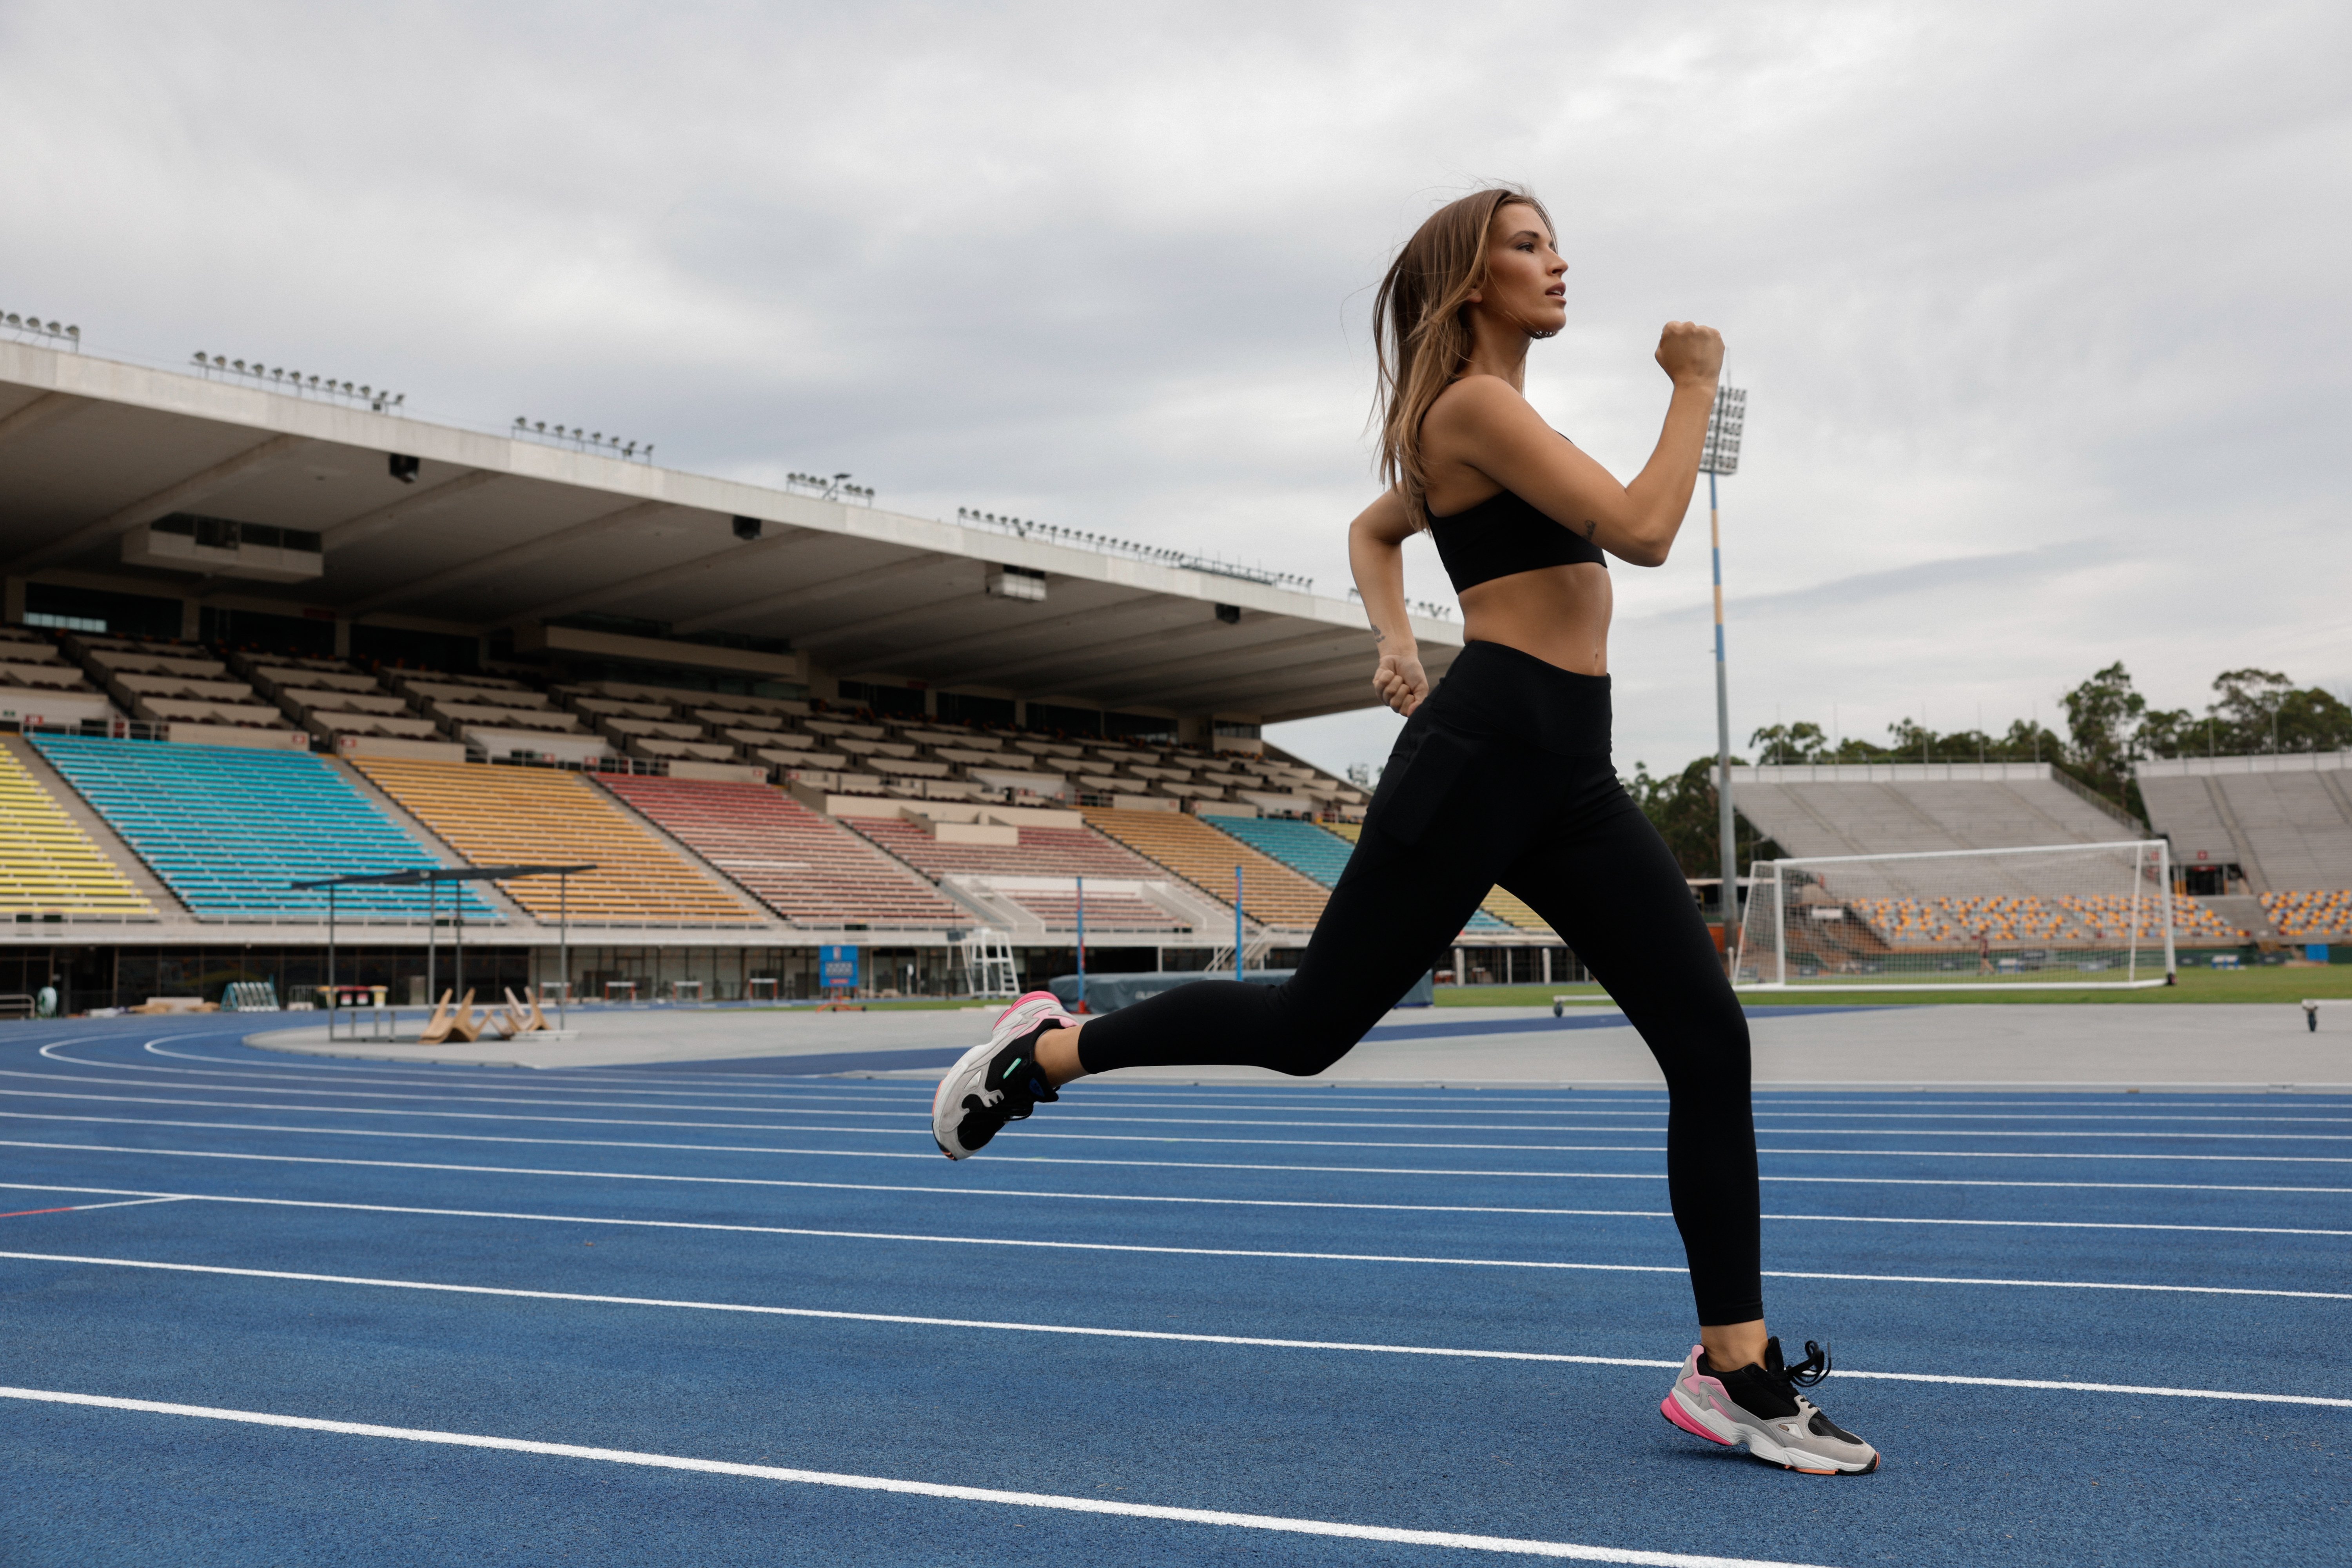 Woman running on a running track wearing black leggings and sports bra